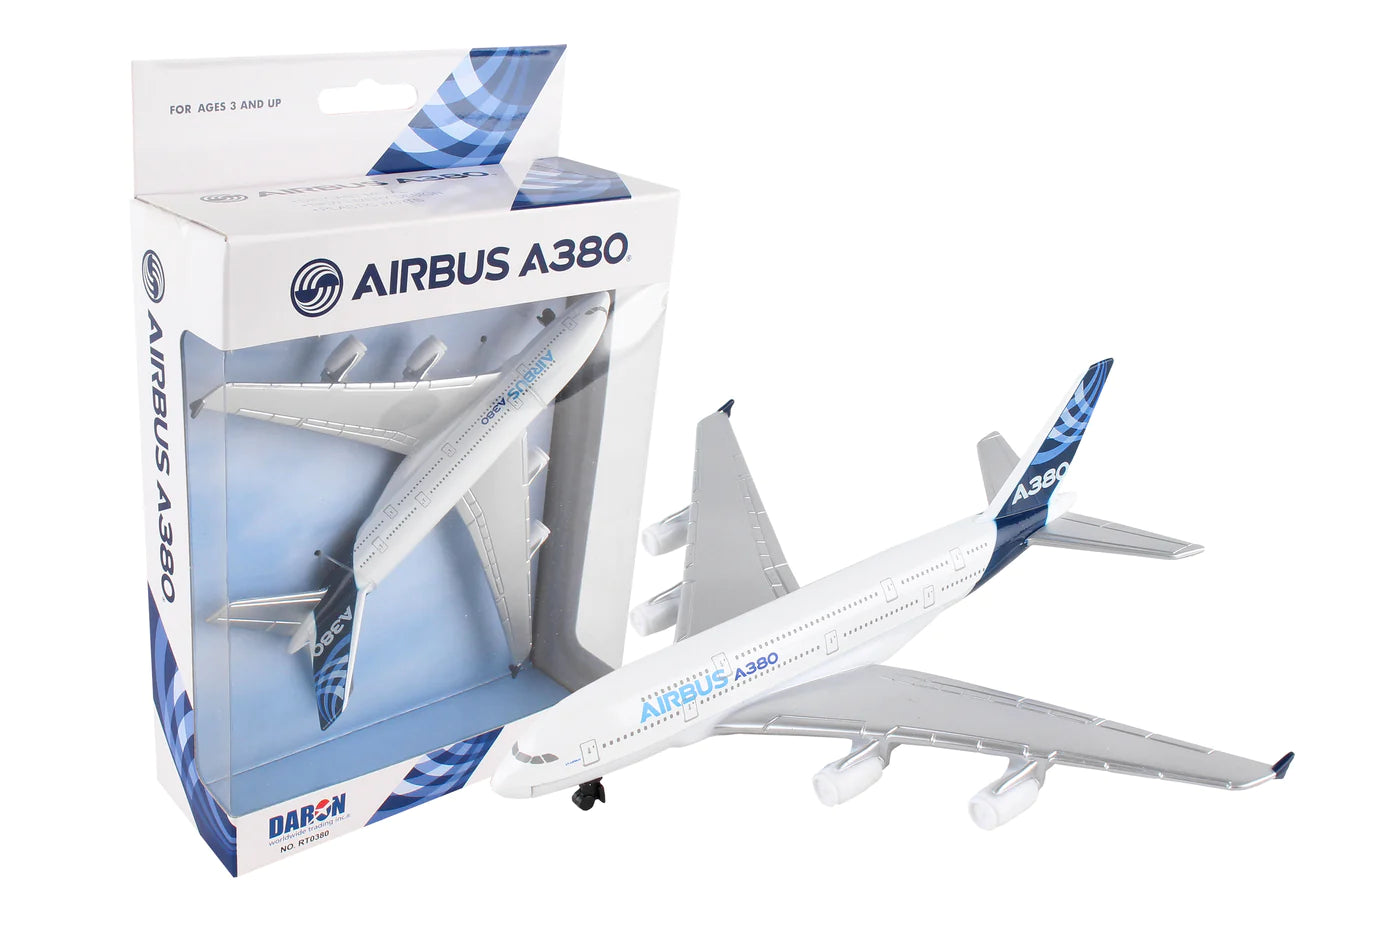 Airbus A380 Diecast Toy